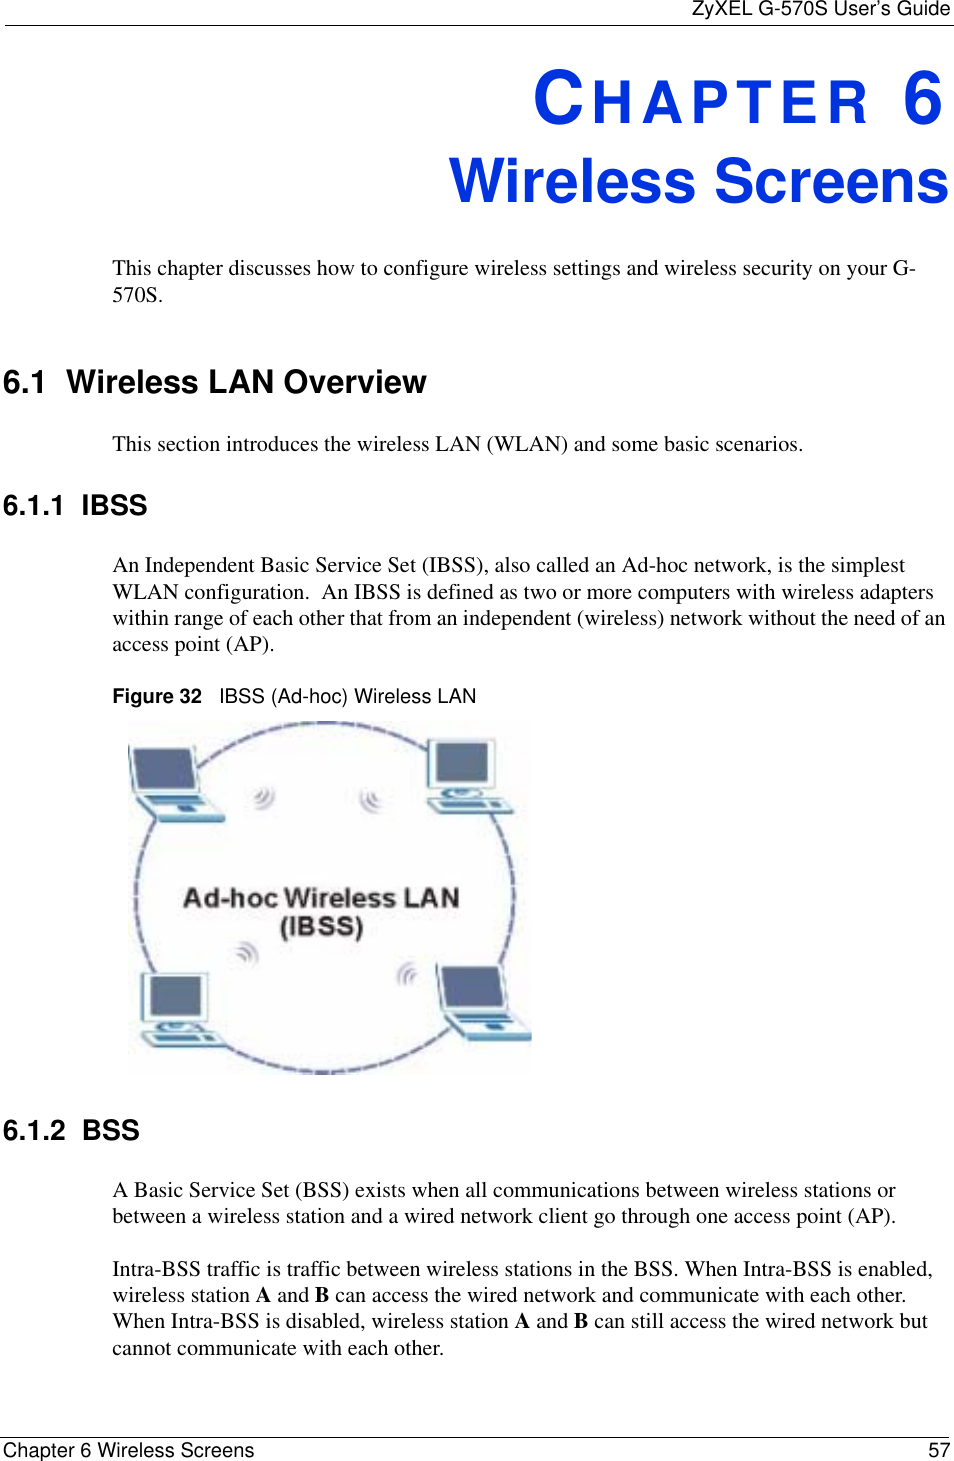 ZyXEL G-570S User’s GuideChapter 6 Wireless Screens 57CHAPTER 6Wireless ScreensThis chapter discusses how to configure wireless settings and wireless security on your G-570S.6.1  Wireless LAN OverviewThis section introduces the wireless LAN (WLAN) and some basic scenarios. 6.1.1  IBSSAn Independent Basic Service Set (IBSS), also called an Ad-hoc network, is the simplest WLAN configuration.  An IBSS is defined as two or more computers with wireless adapters within range of each other that from an independent (wireless) network without the need of an access point (AP).Figure 32   IBSS (Ad-hoc) Wireless LAN6.1.2  BSSA Basic Service Set (BSS) exists when all communications between wireless stations or between a wireless station and a wired network client go through one access point (AP). Intra-BSS traffic is traffic between wireless stations in the BSS. When Intra-BSS is enabled, wireless station A and B can access the wired network and communicate with each other. When Intra-BSS is disabled, wireless station A and B can still access the wired network but cannot communicate with each other.